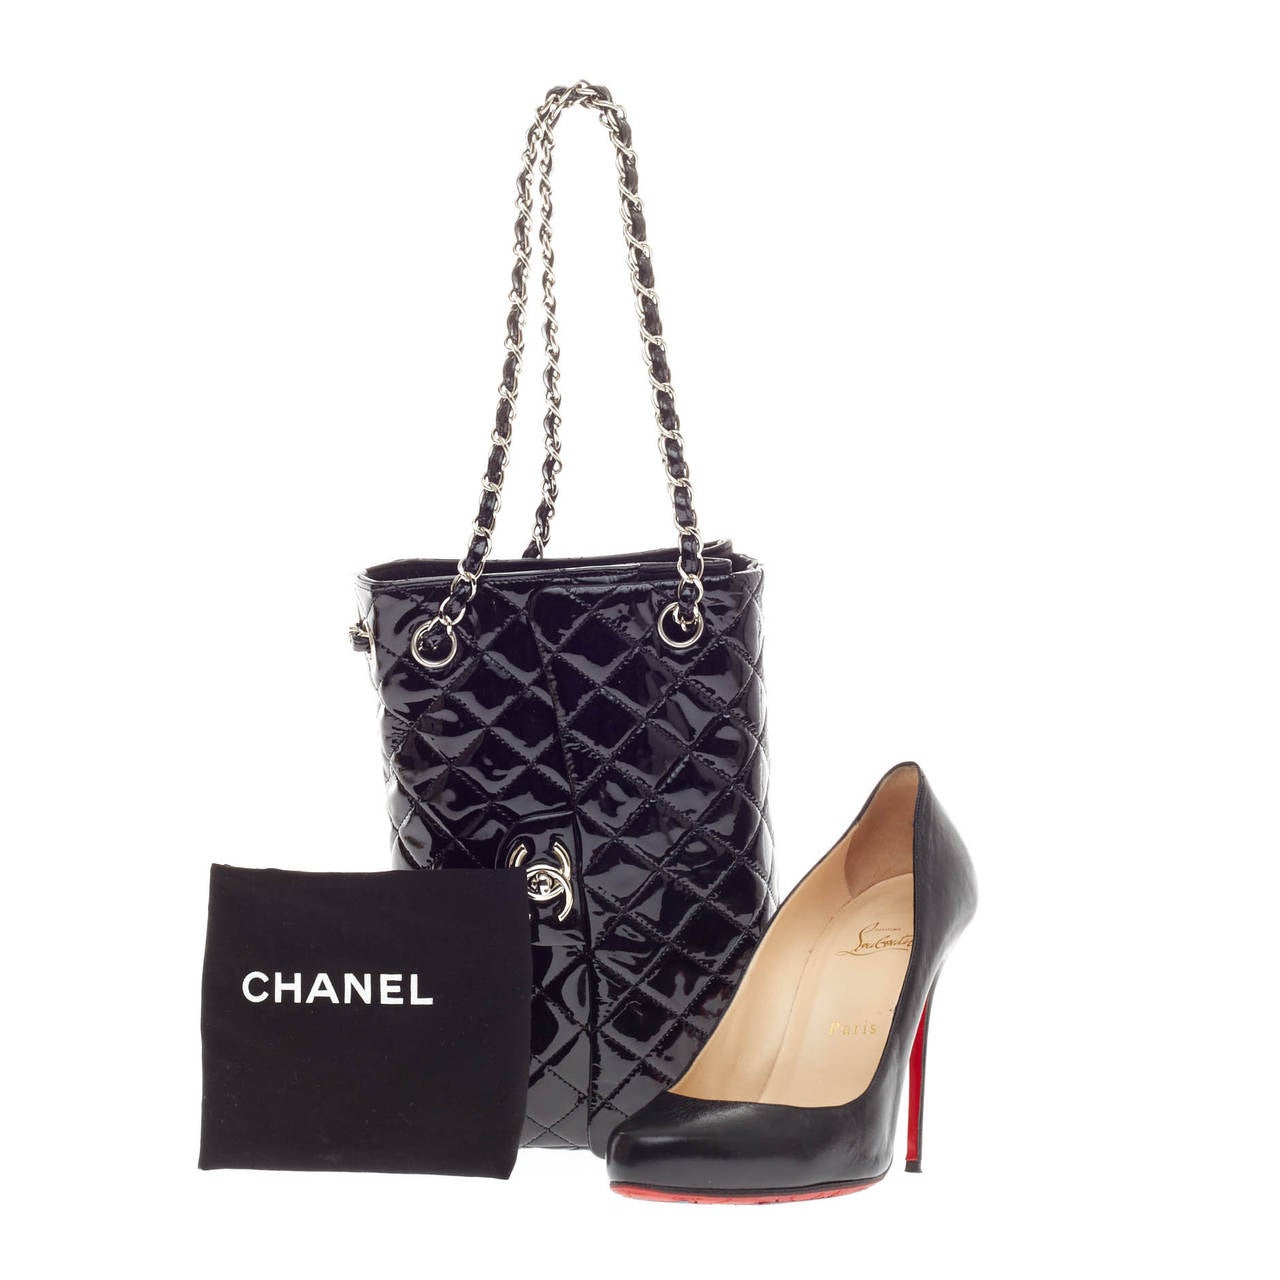 This authentic Chanel Upside Down Flap Bag Quilted Patent showcased in Chanel's Spring 2009 collection is designed as classic flap bag with a whimsical twist. Crafted from shiny black patent leather, the bag's leather woven-in straps are turned on